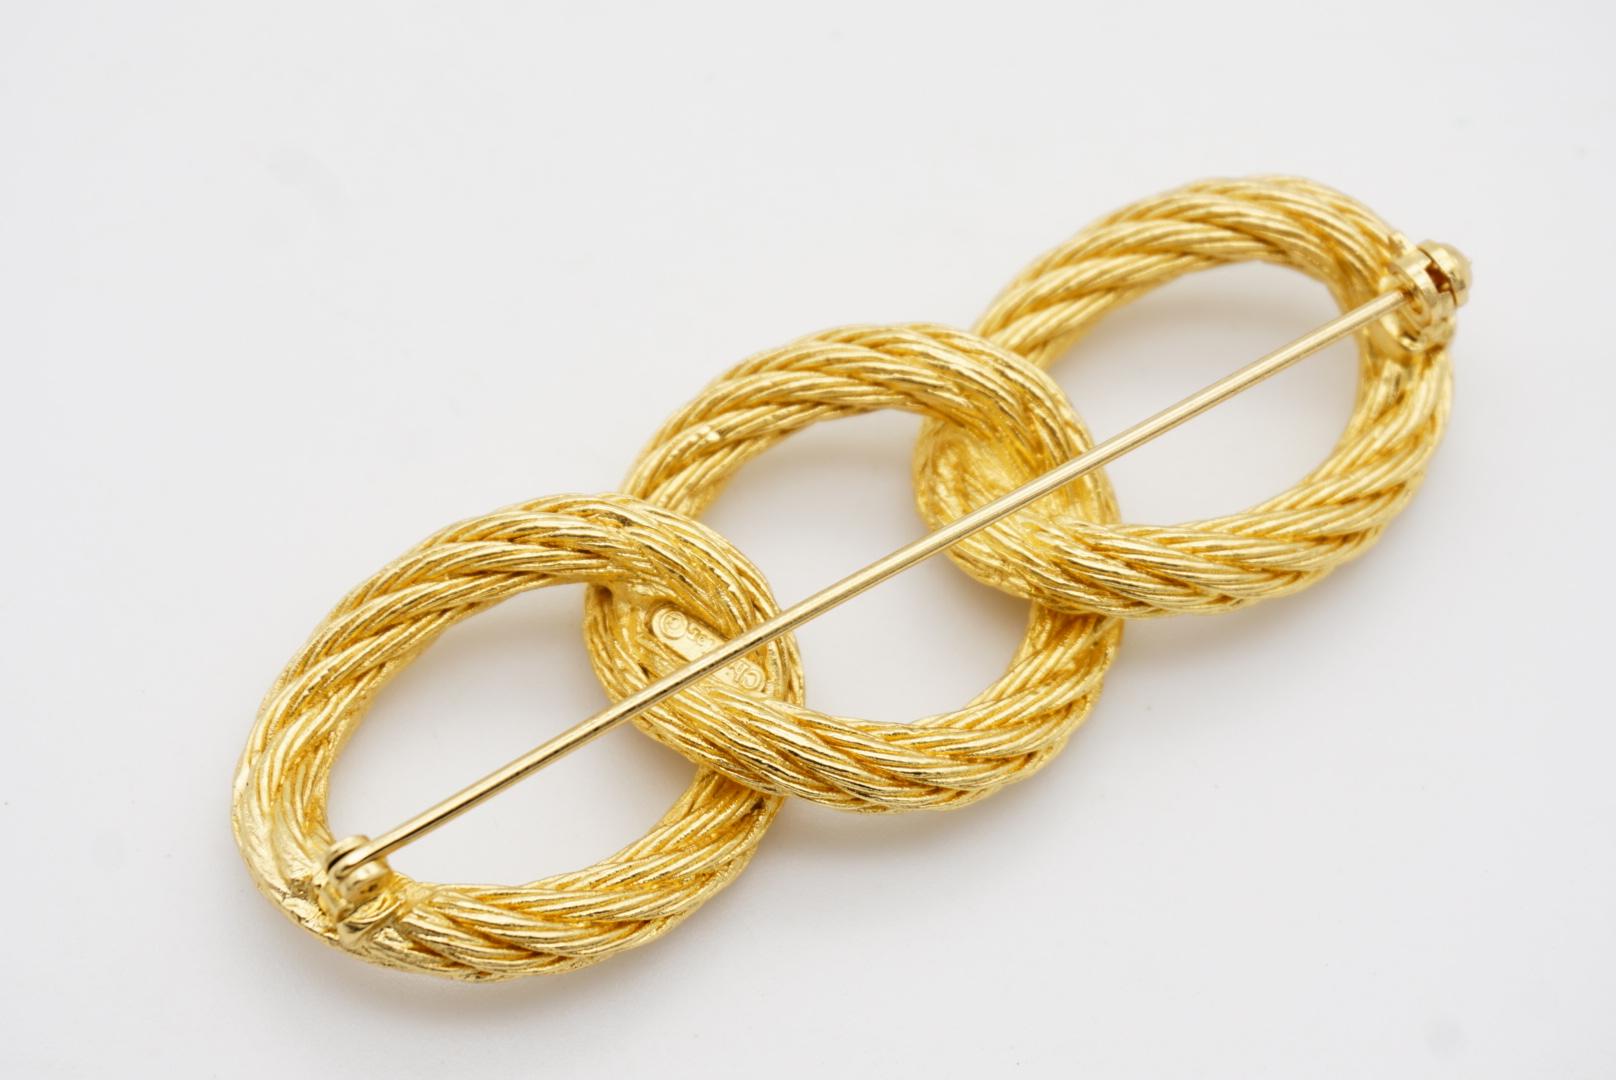 Christian Dior 1980s Vintage Large Trio Oval Interlocked Rope Twist Knot Brooch For Sale 7